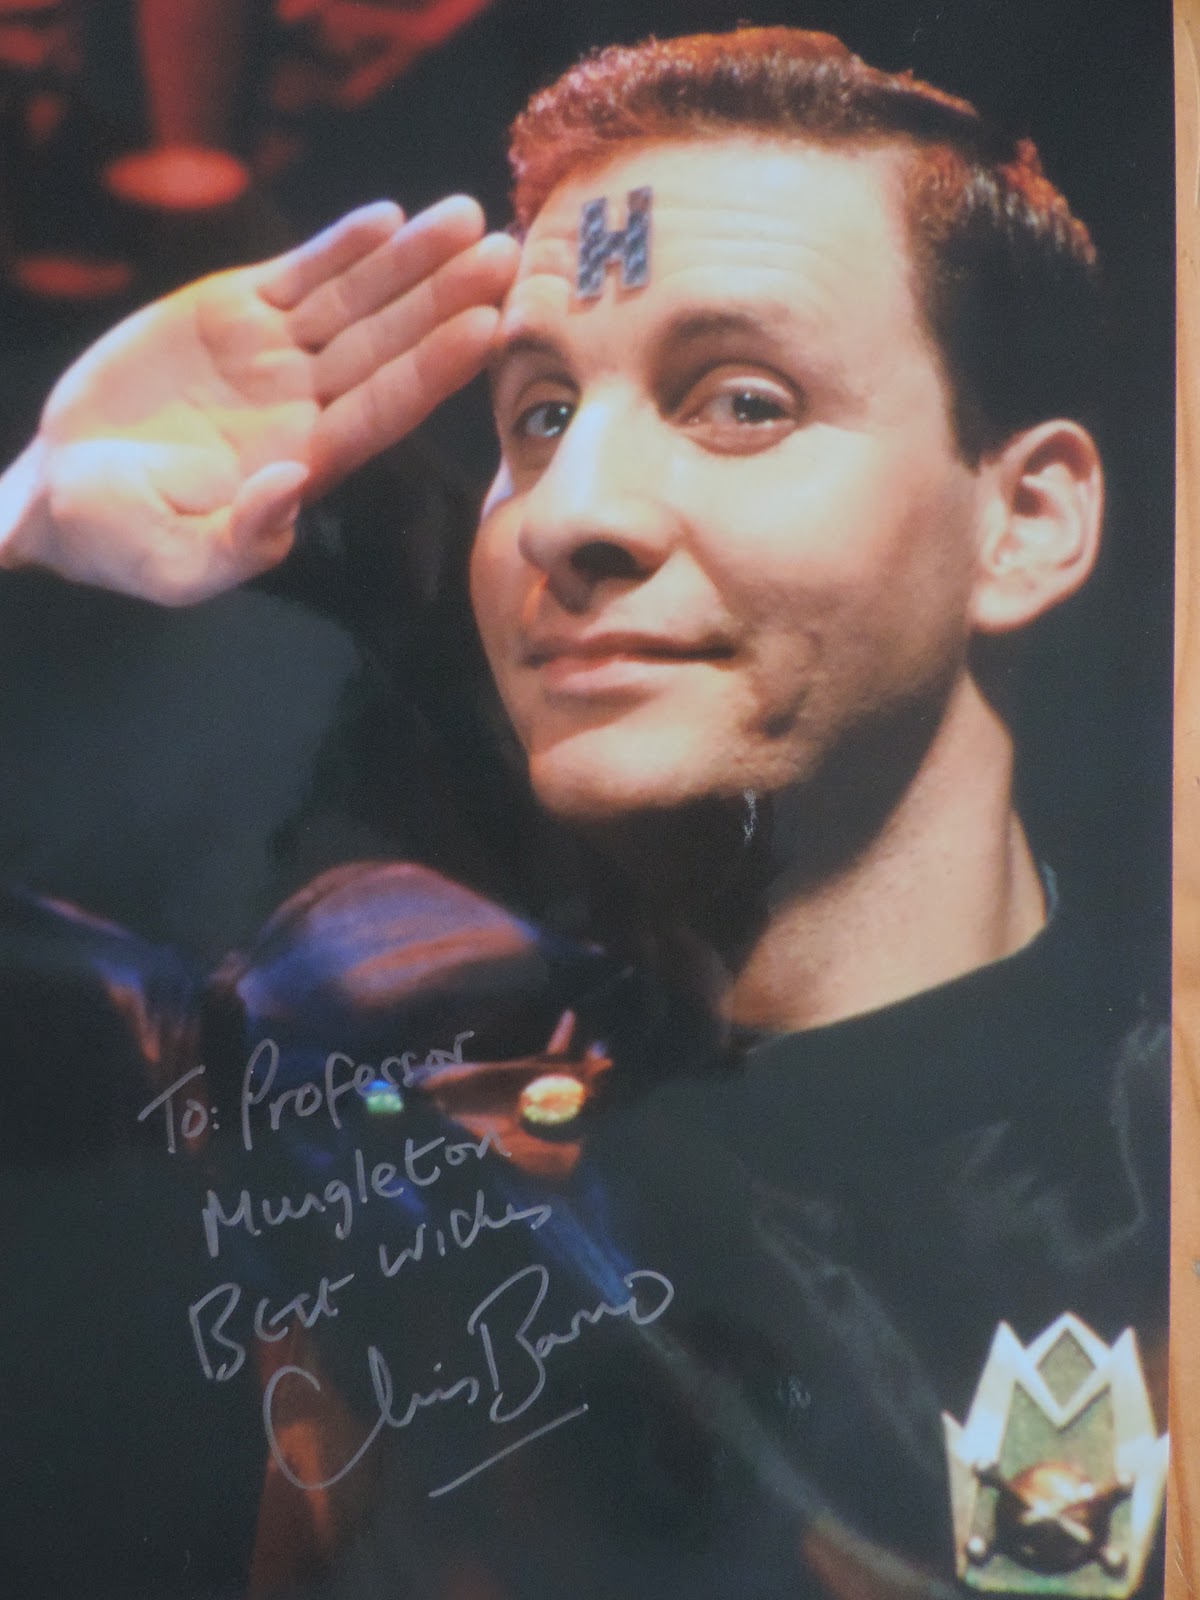 star signings at def con 3 totton southampton chris barrie arnold judas rimmer